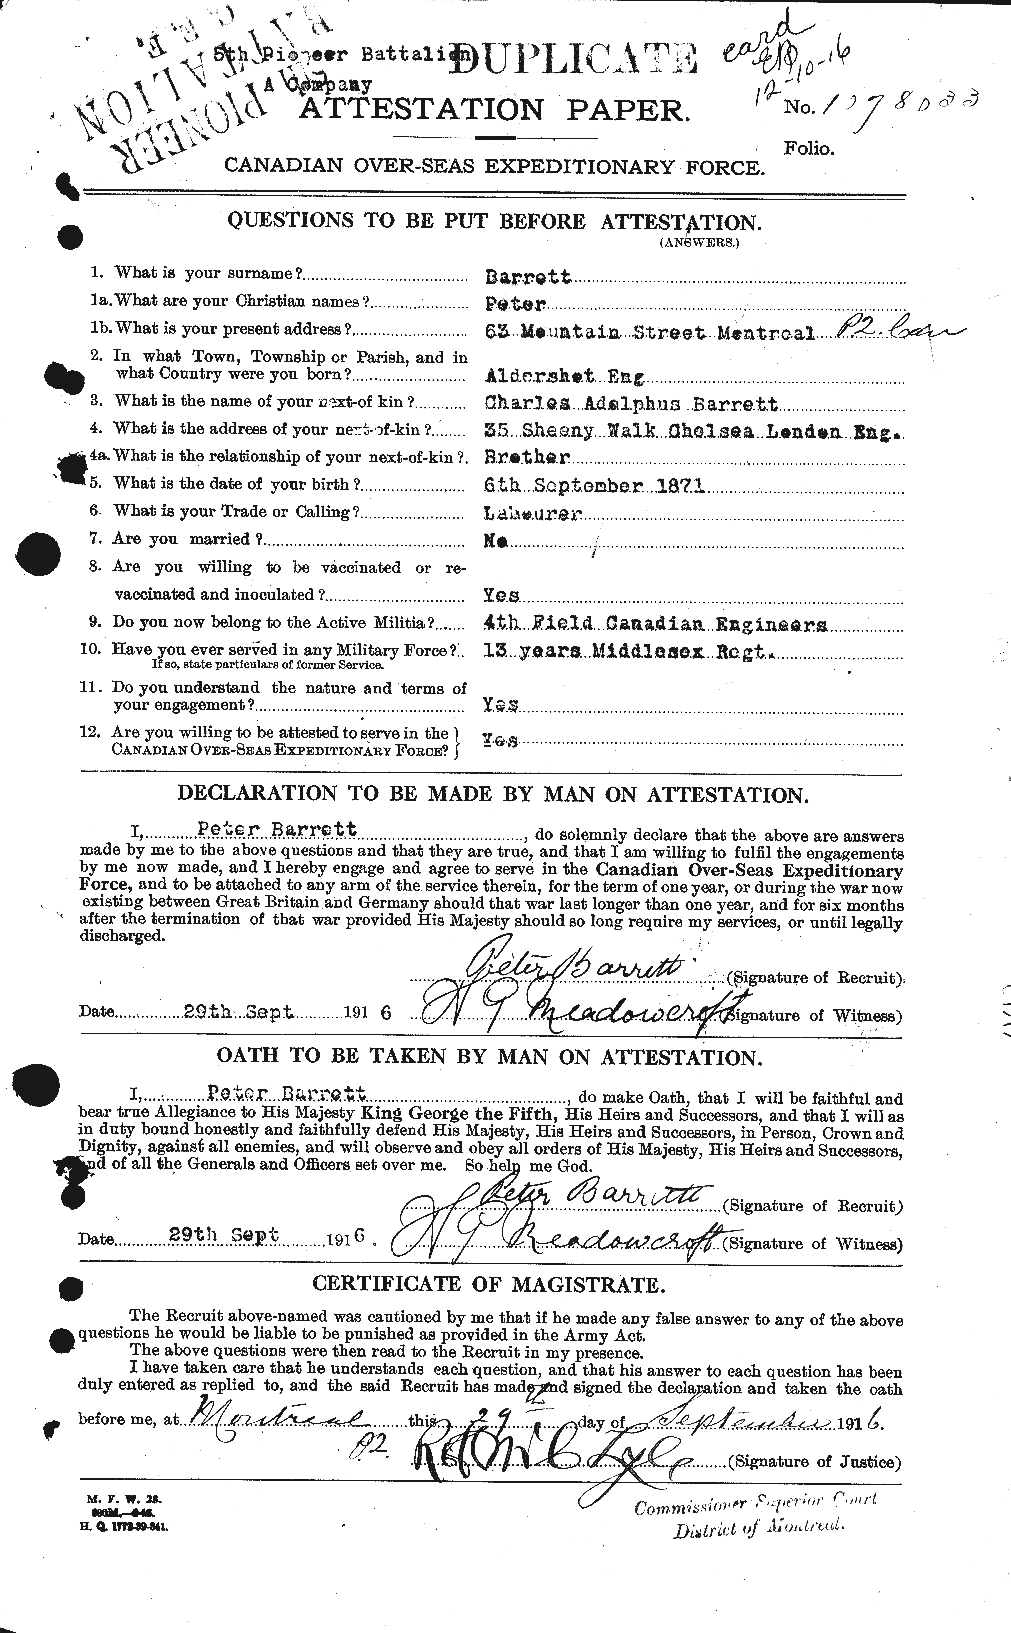 Personnel Records of the First World War - CEF 220202a